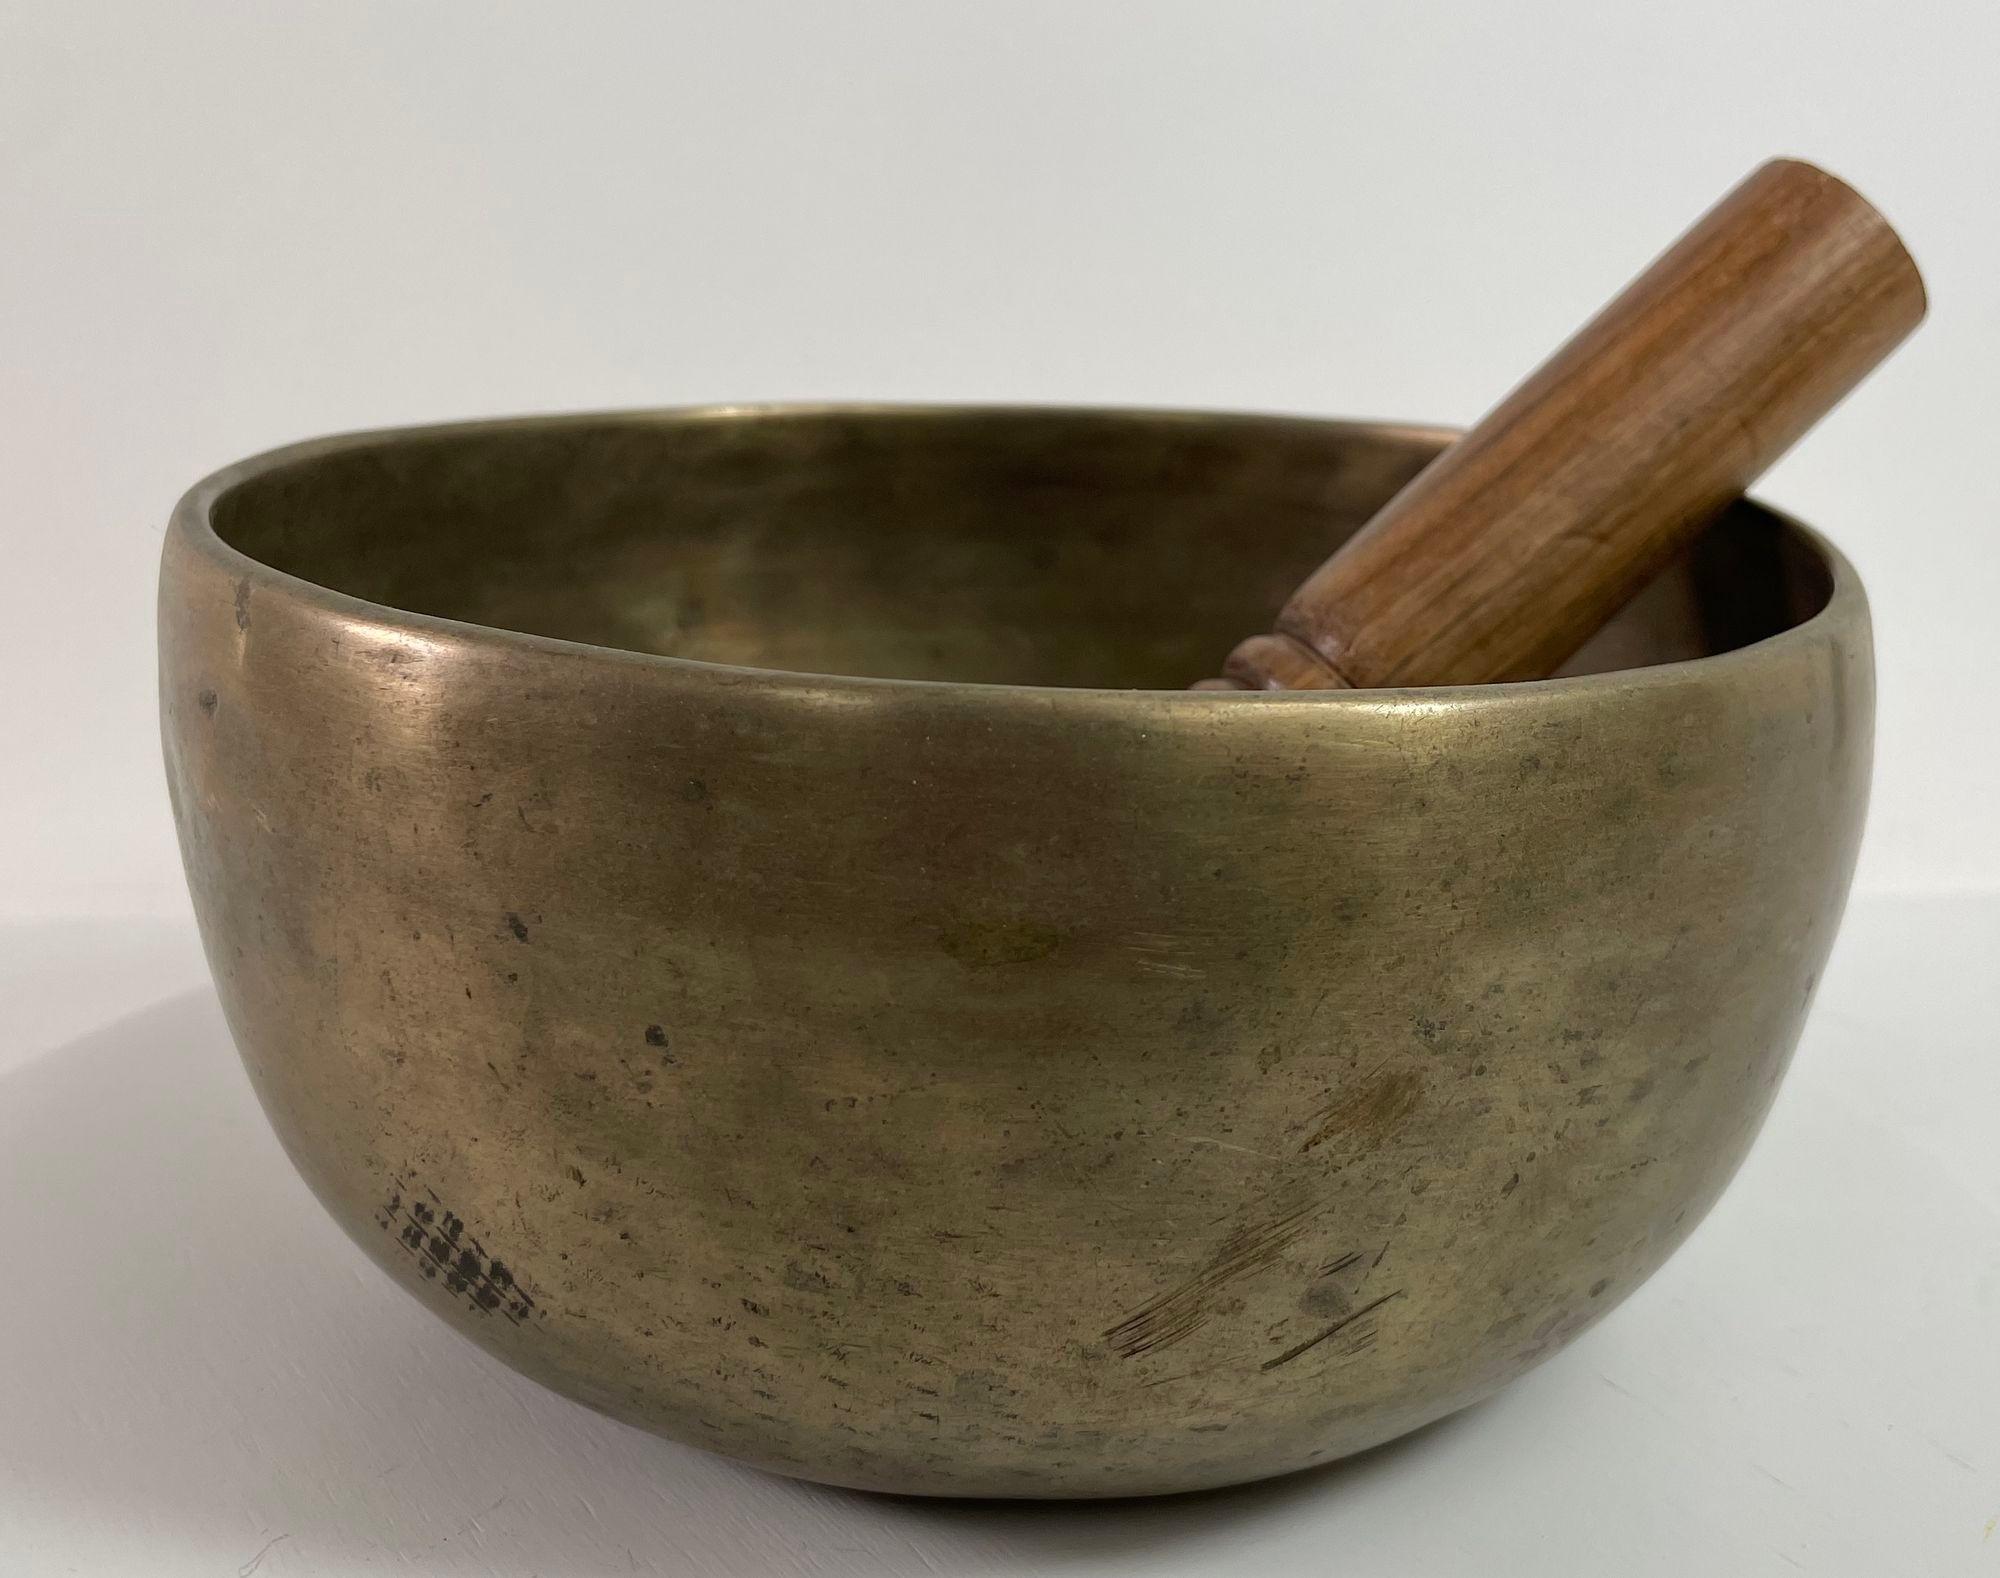 Large hand-hammered Tibetan bronze bowl, they are used in some Buddhist religious practices to accompany periods of meditation and chanting.
They have become popular with music therapists, sound healers and yoga practitioners.
The singing bowl is